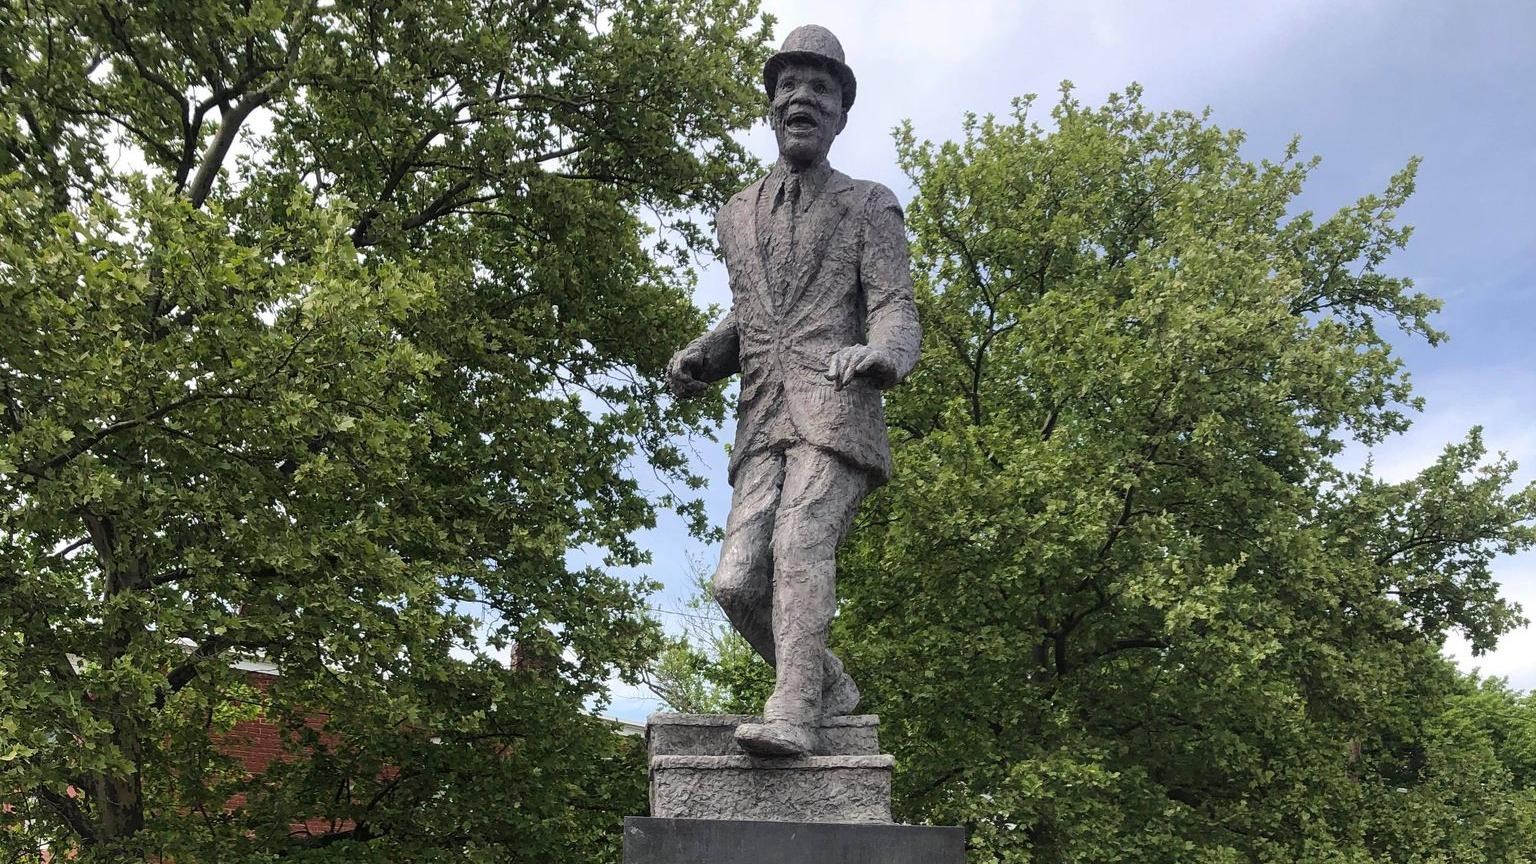 A metal statue of Bill Robinson mid-dance step, wearing a suit and bowler hat standing on a pillar